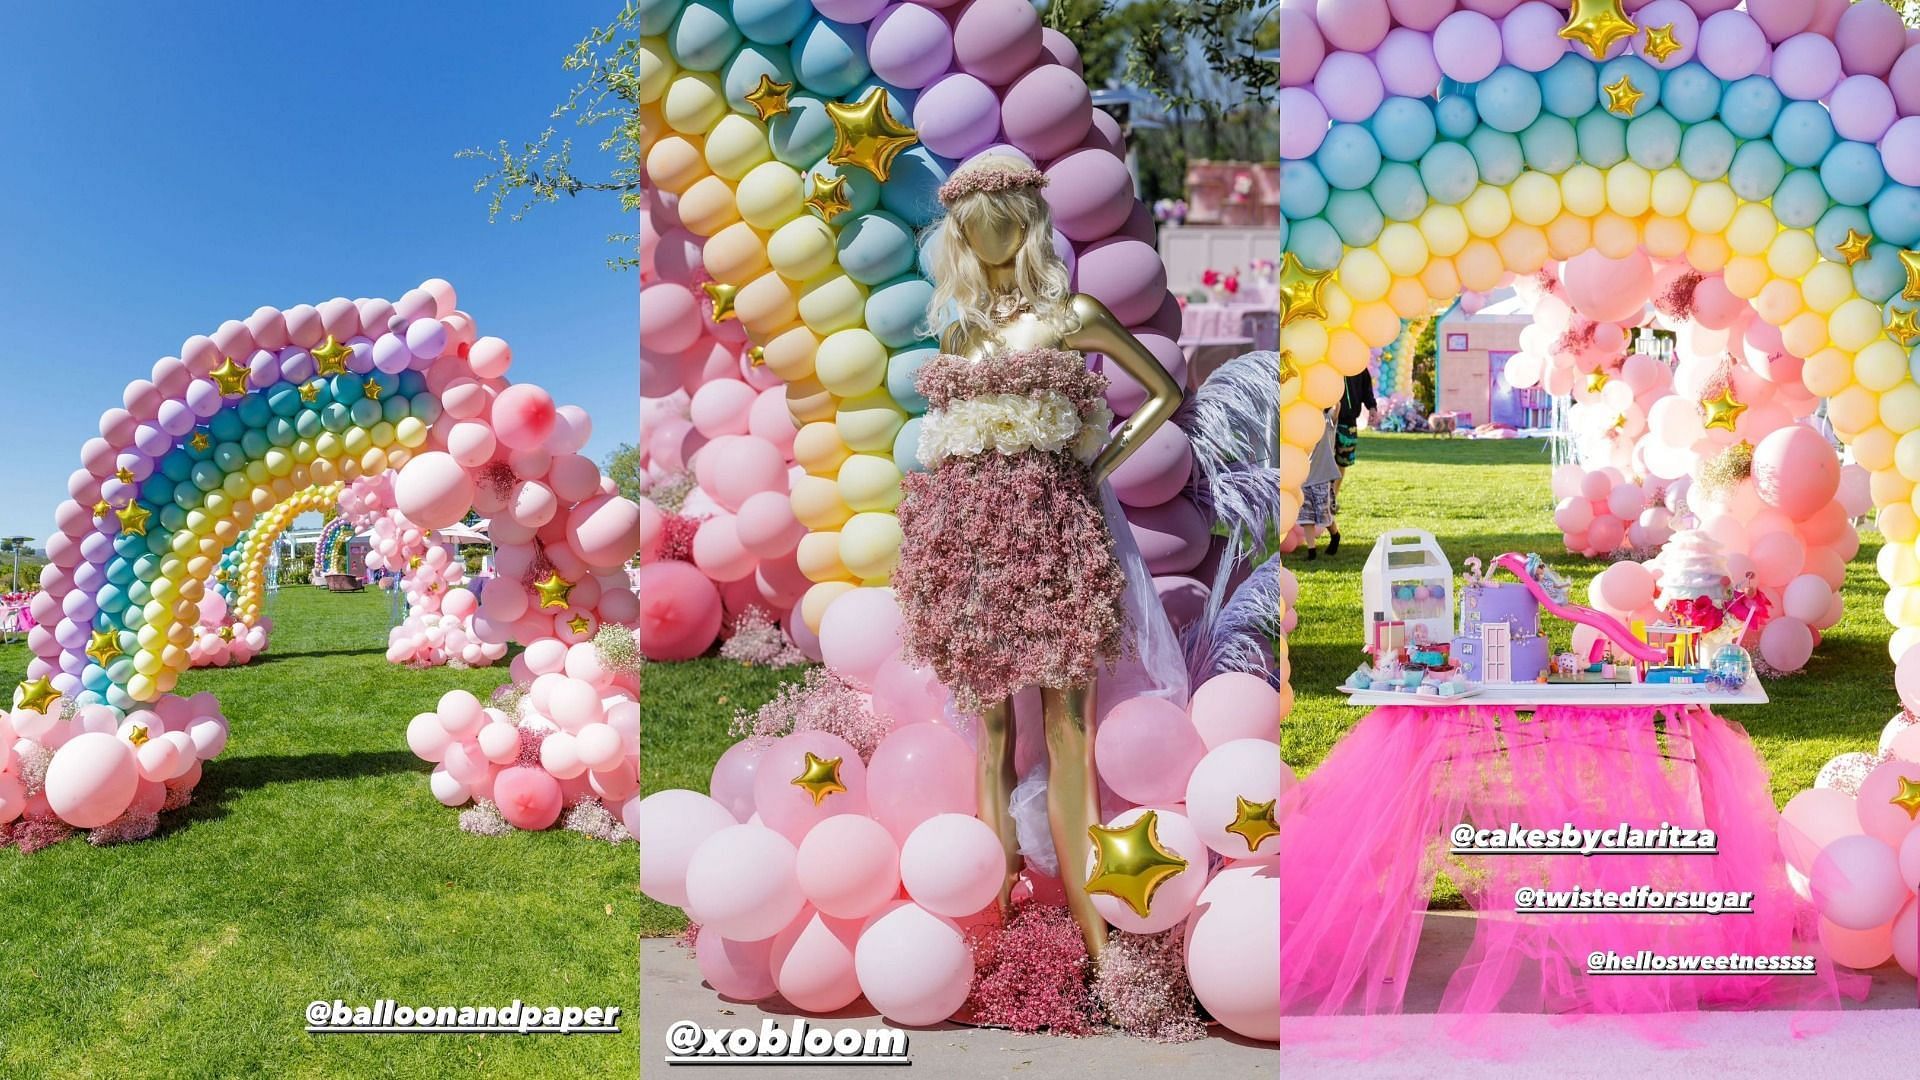 Jessica Simpson Throws Barbie Birthday Party for Daughter Birdie